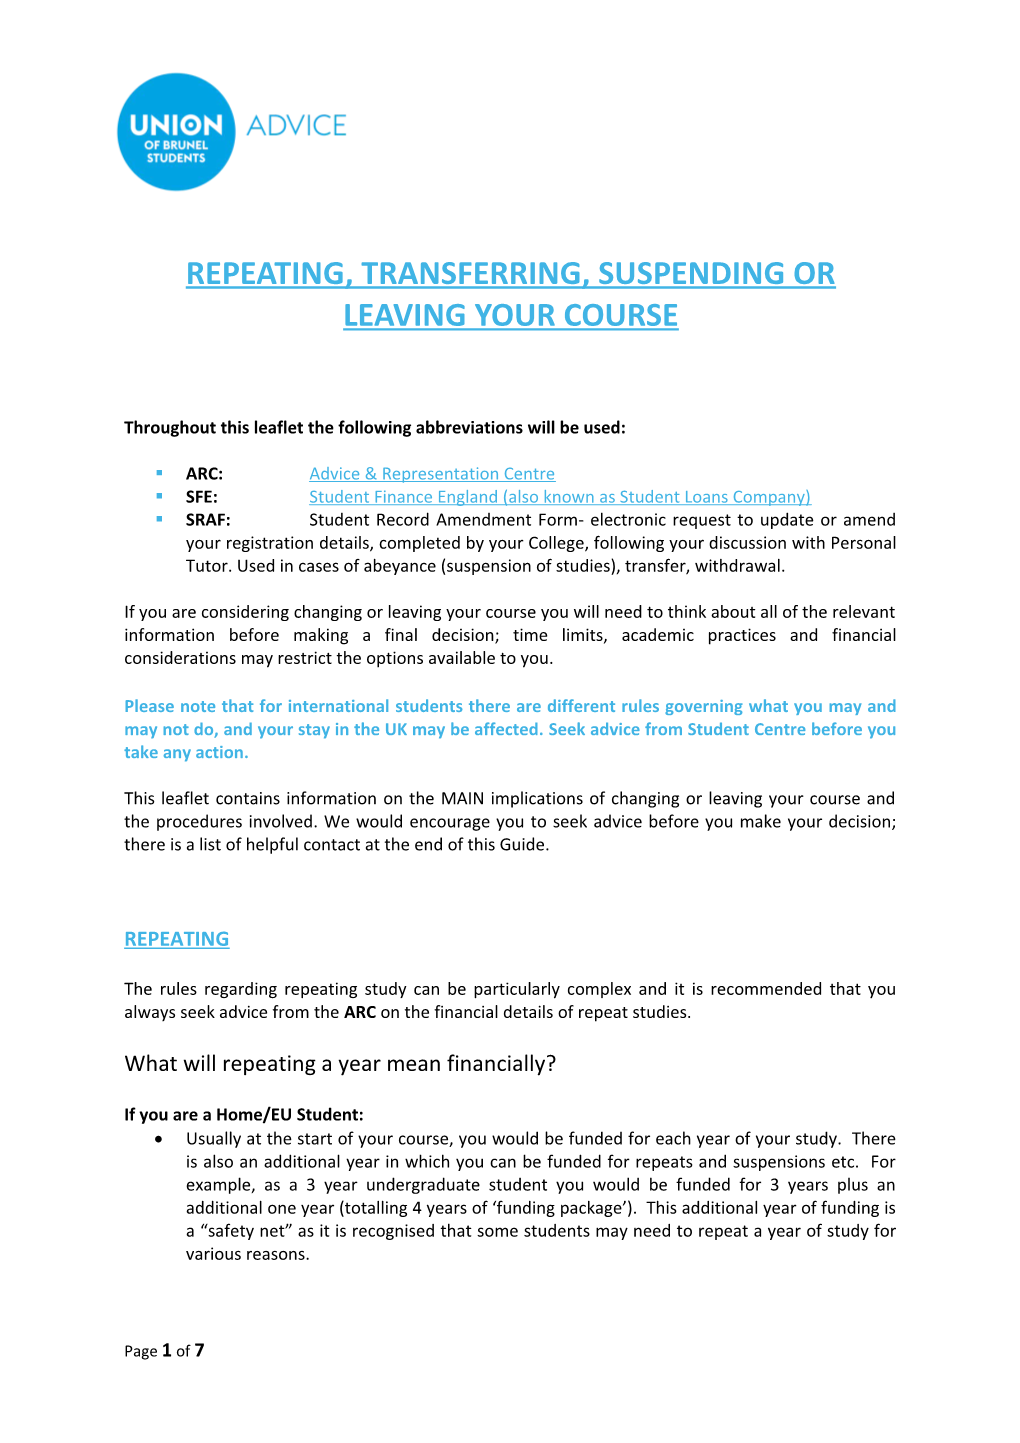 The ARC Guide to Repeating, Transferring, Suspending Or Leaving Your Course